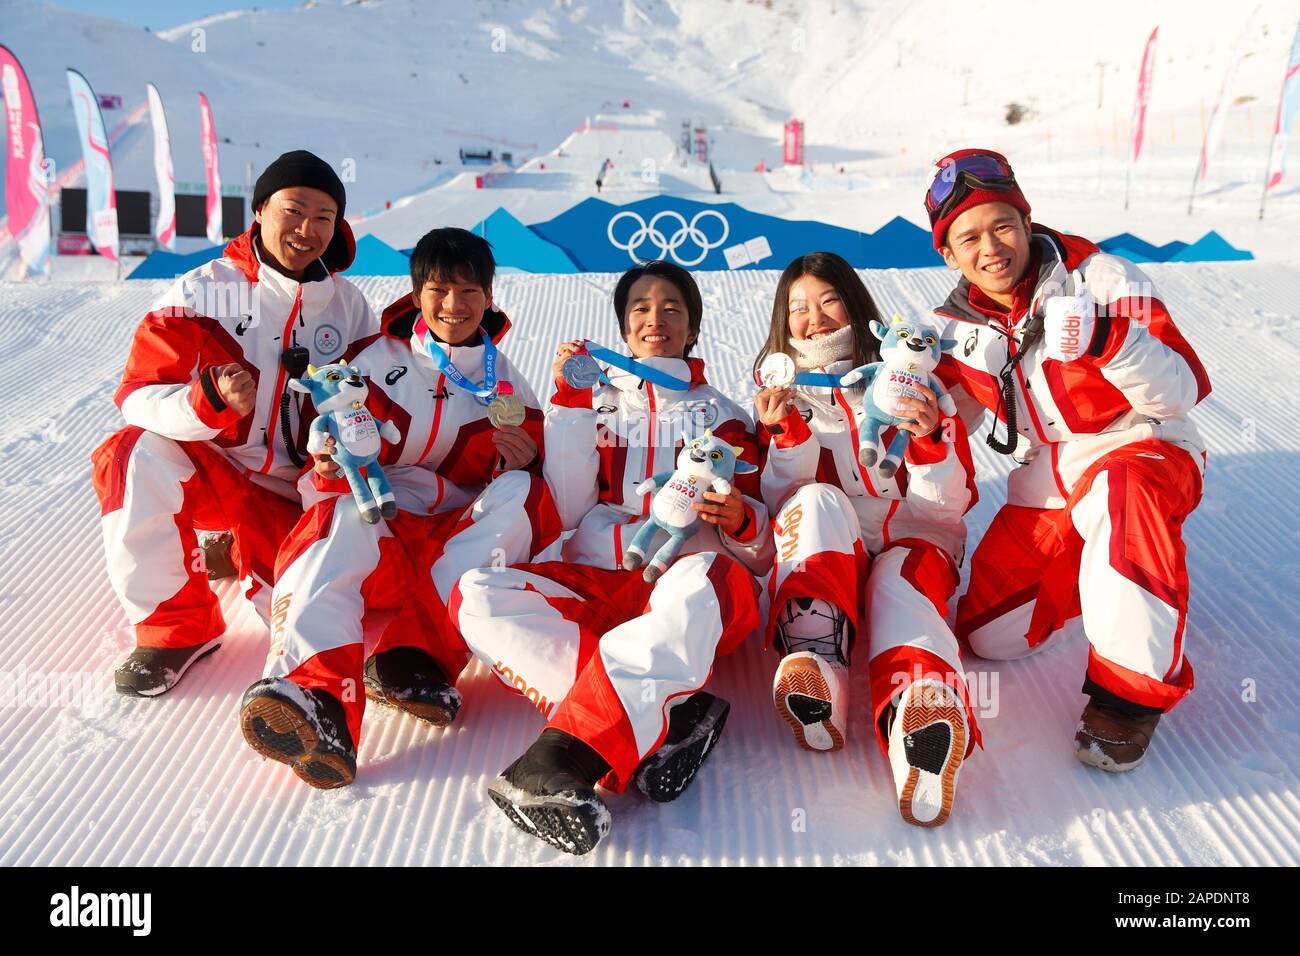 Lausanne, Switzerland. 22nd Jan, 2020. Japan team group (JPN) Snowboarding : Big Air at Leysin Park & Pipe during the Lausanne 2020 Winter Youth Olympic Games in Lausanne, Switzerland . Credit: Naoki Morita/AFLO SPORT/Alamy Live News Stock Photo